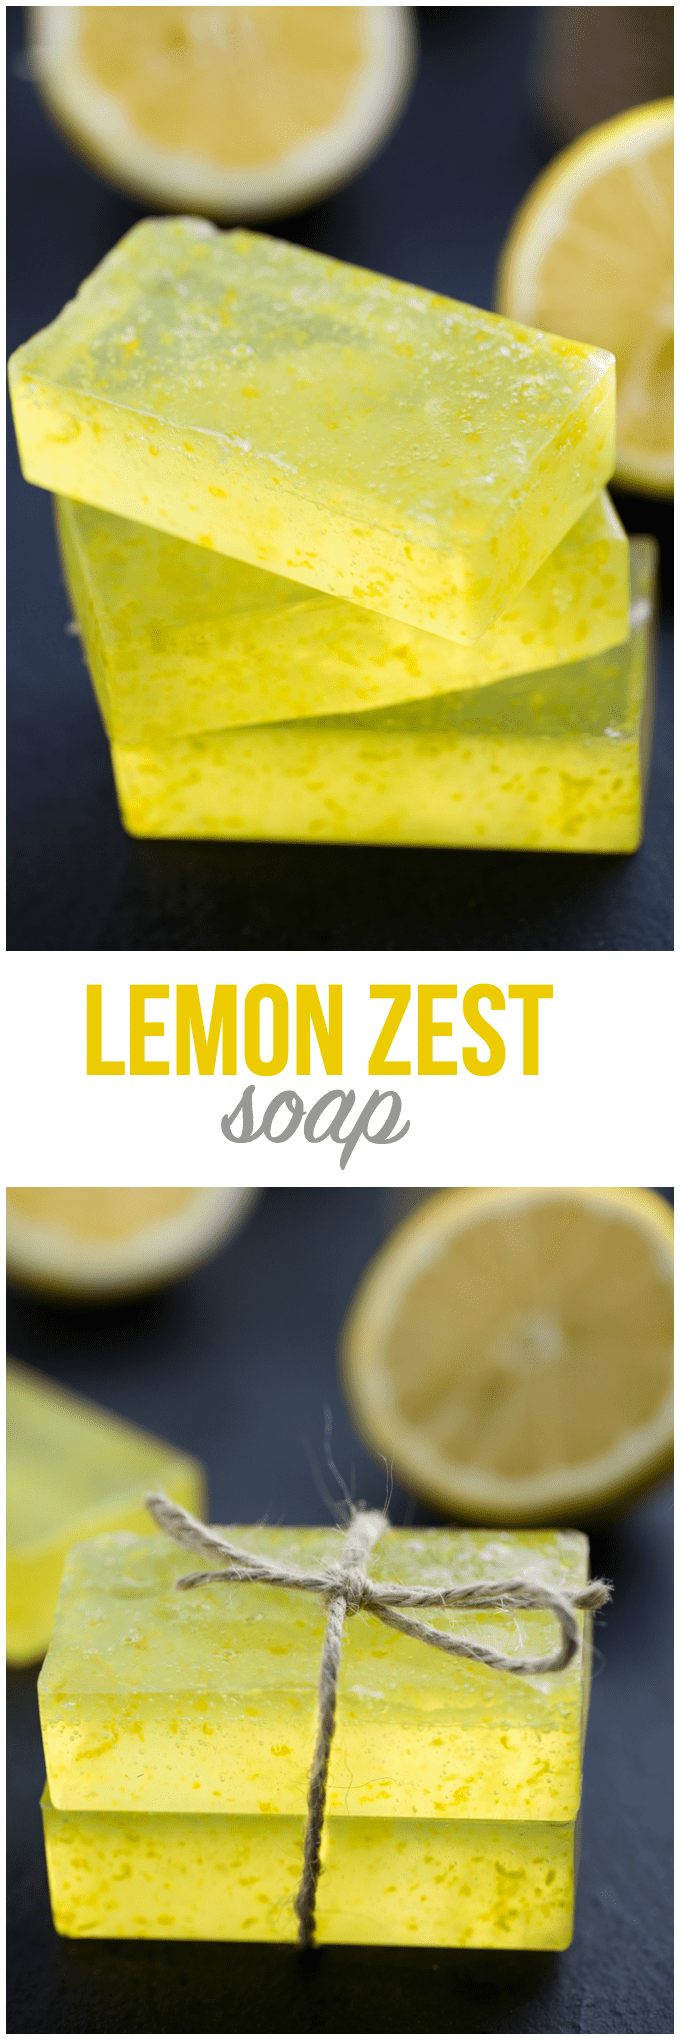 Lemon Zest Soap - Only three ingredients in this simple DIY! This Lemon Zest Soap smells fresh and clean and feels great on skin.